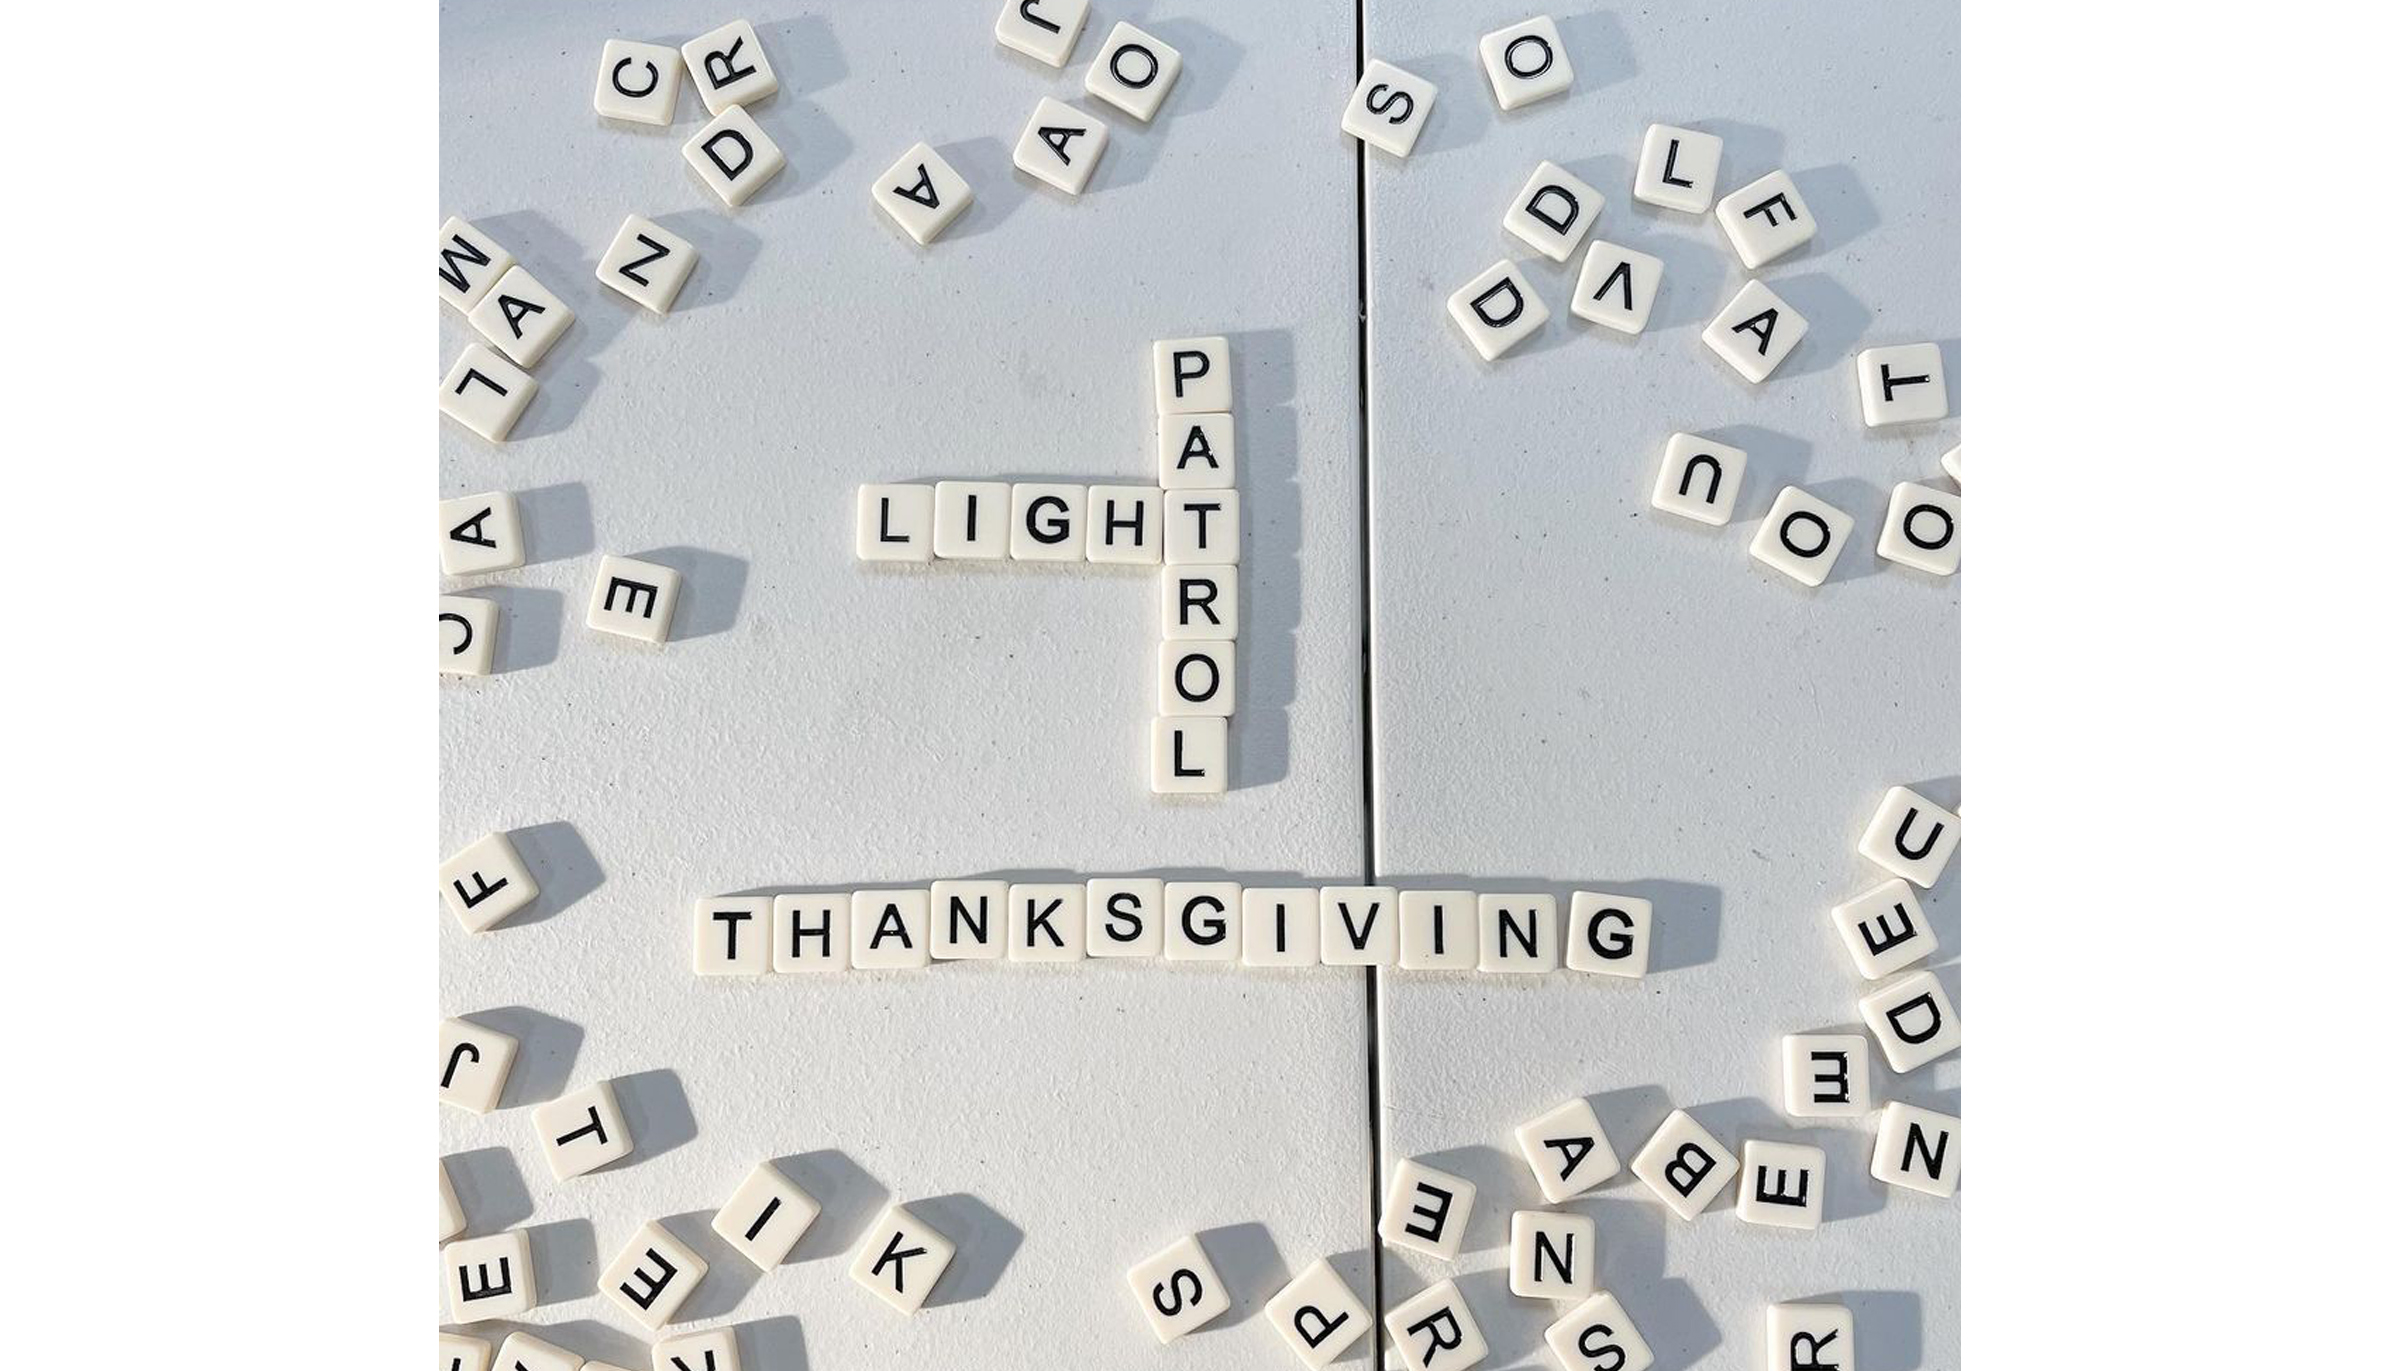 Scrabble game with words Light Partol and Thanksgiving